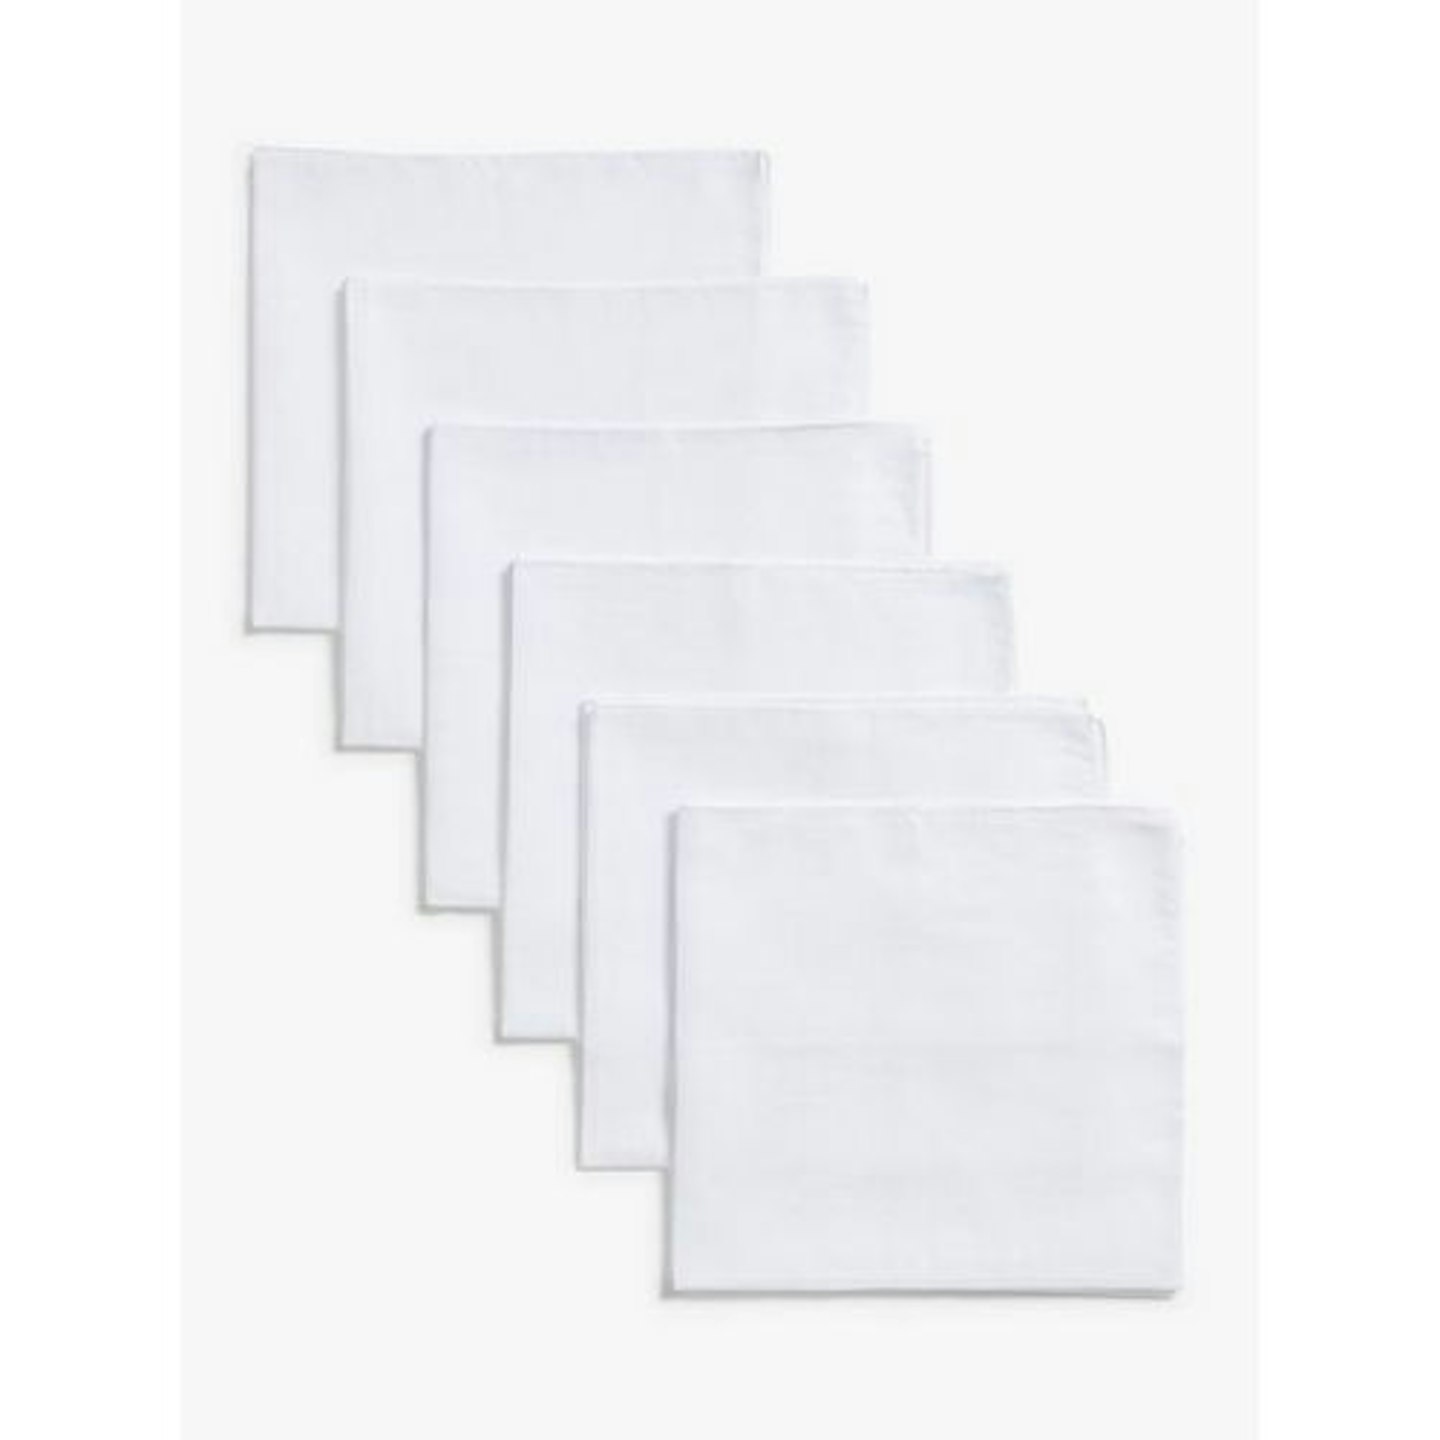 ANYDAY John Lewis & Partners Muslin Squares